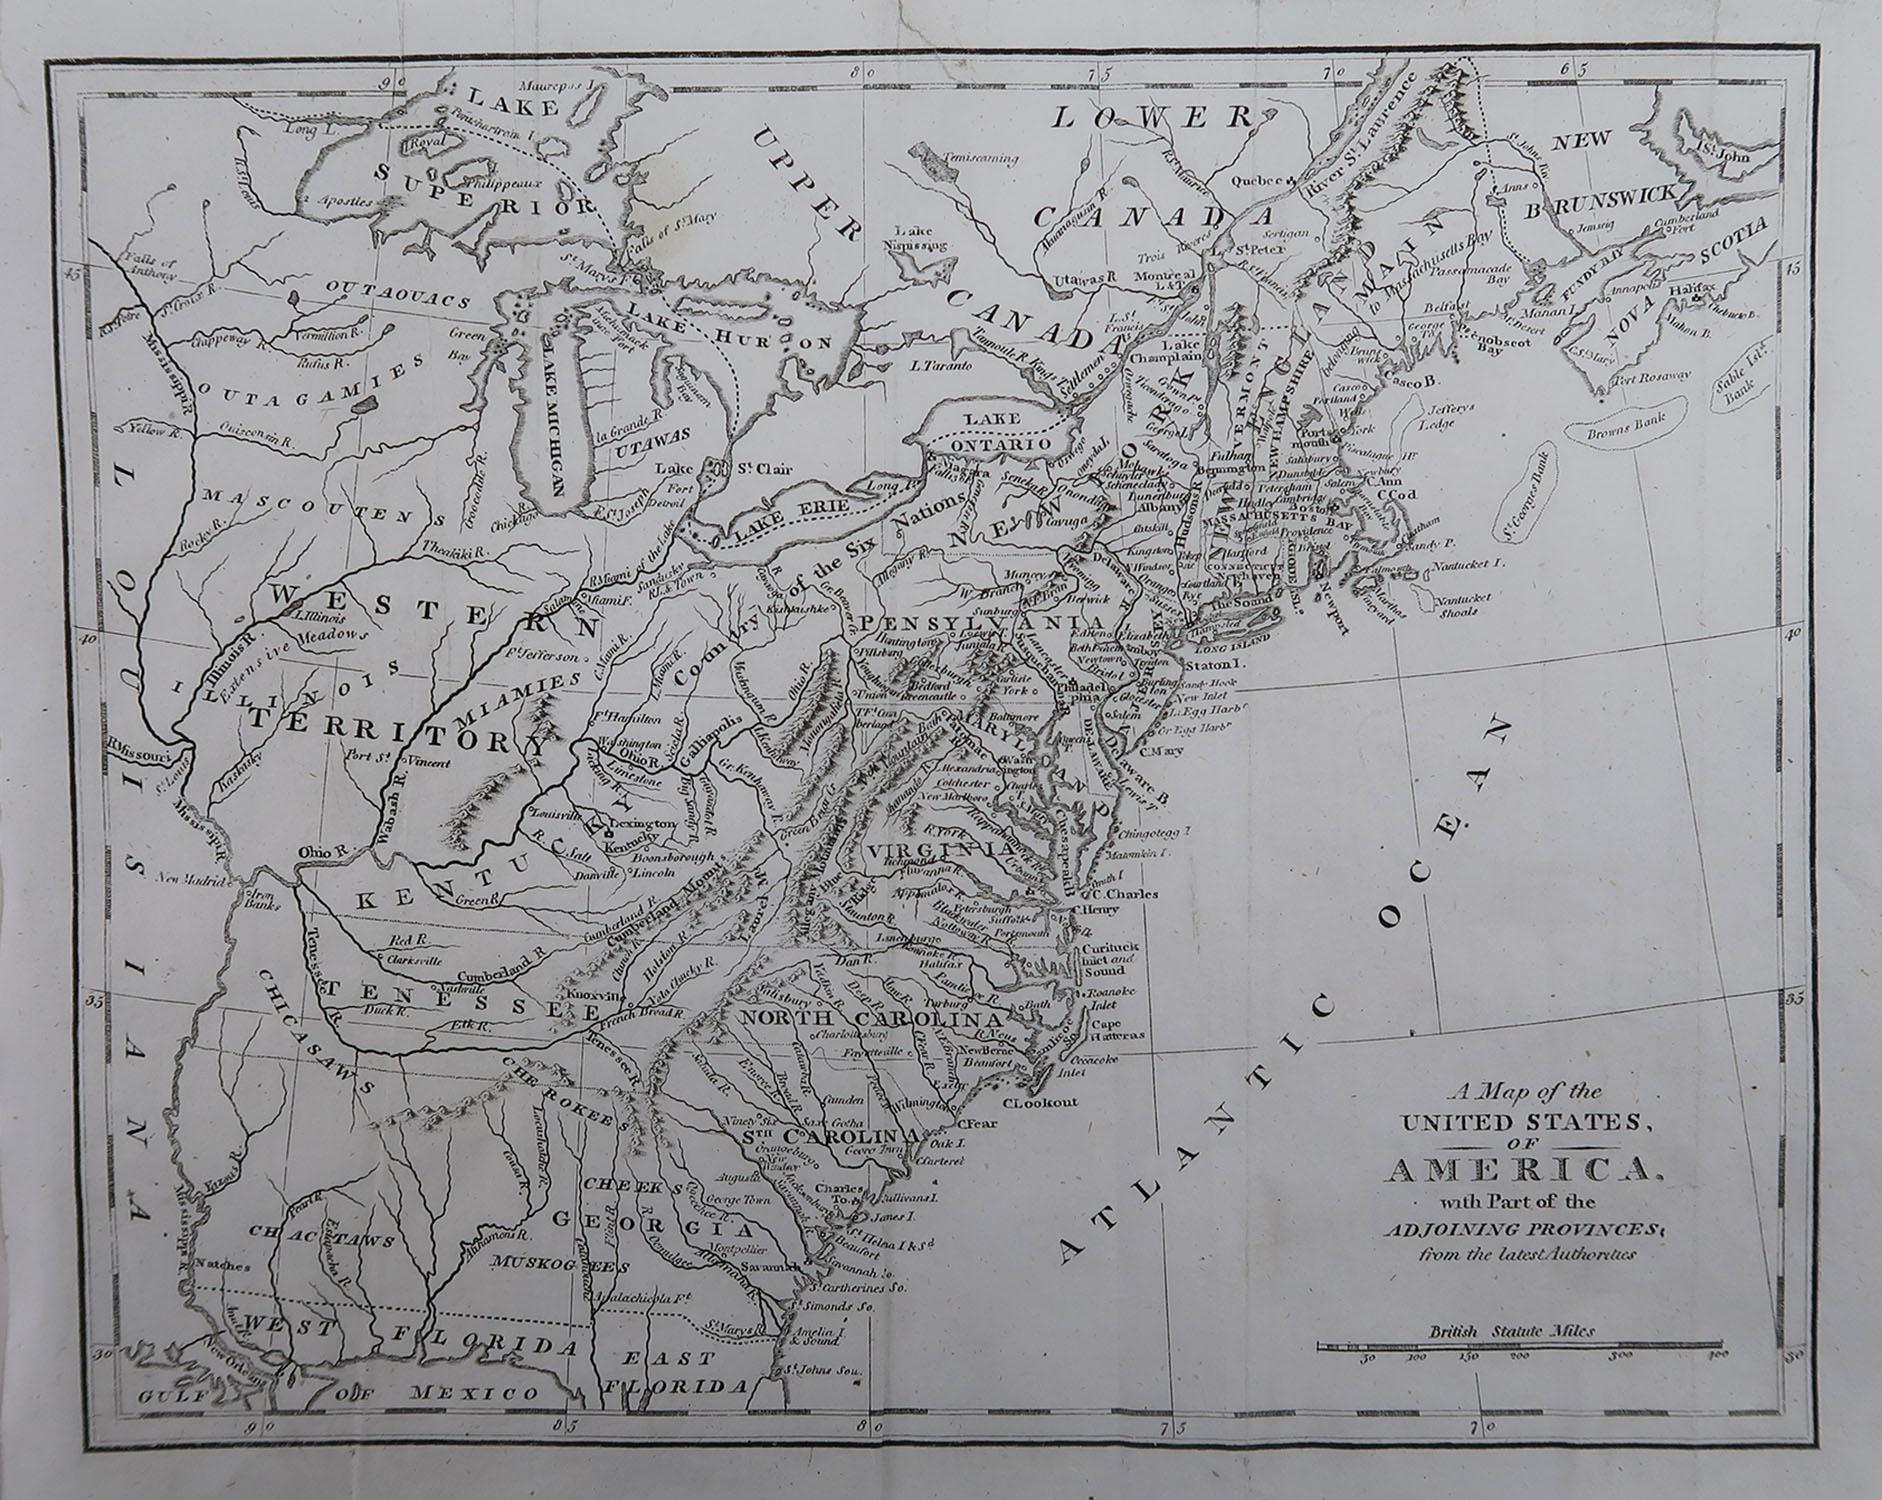 Rare map of the United States

Copper plate engraving

Published, circa 1800.

Originally from Barclay's Dictionary

Unframed

Two repairs to minor edge tears.